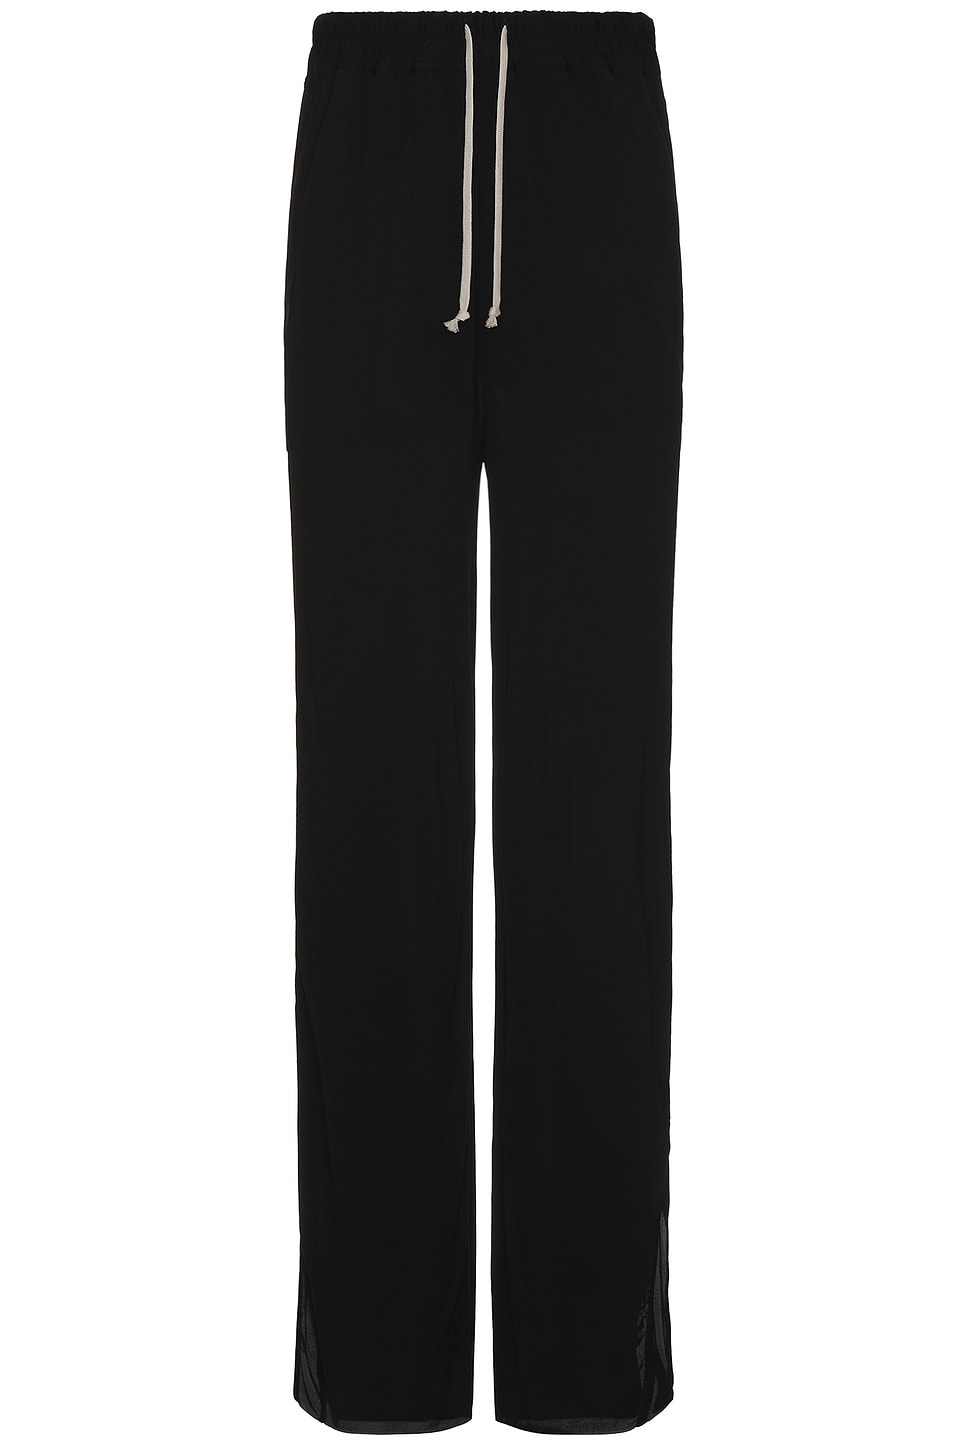 Image 1 of Rick Owens Lido Track Pant in Black